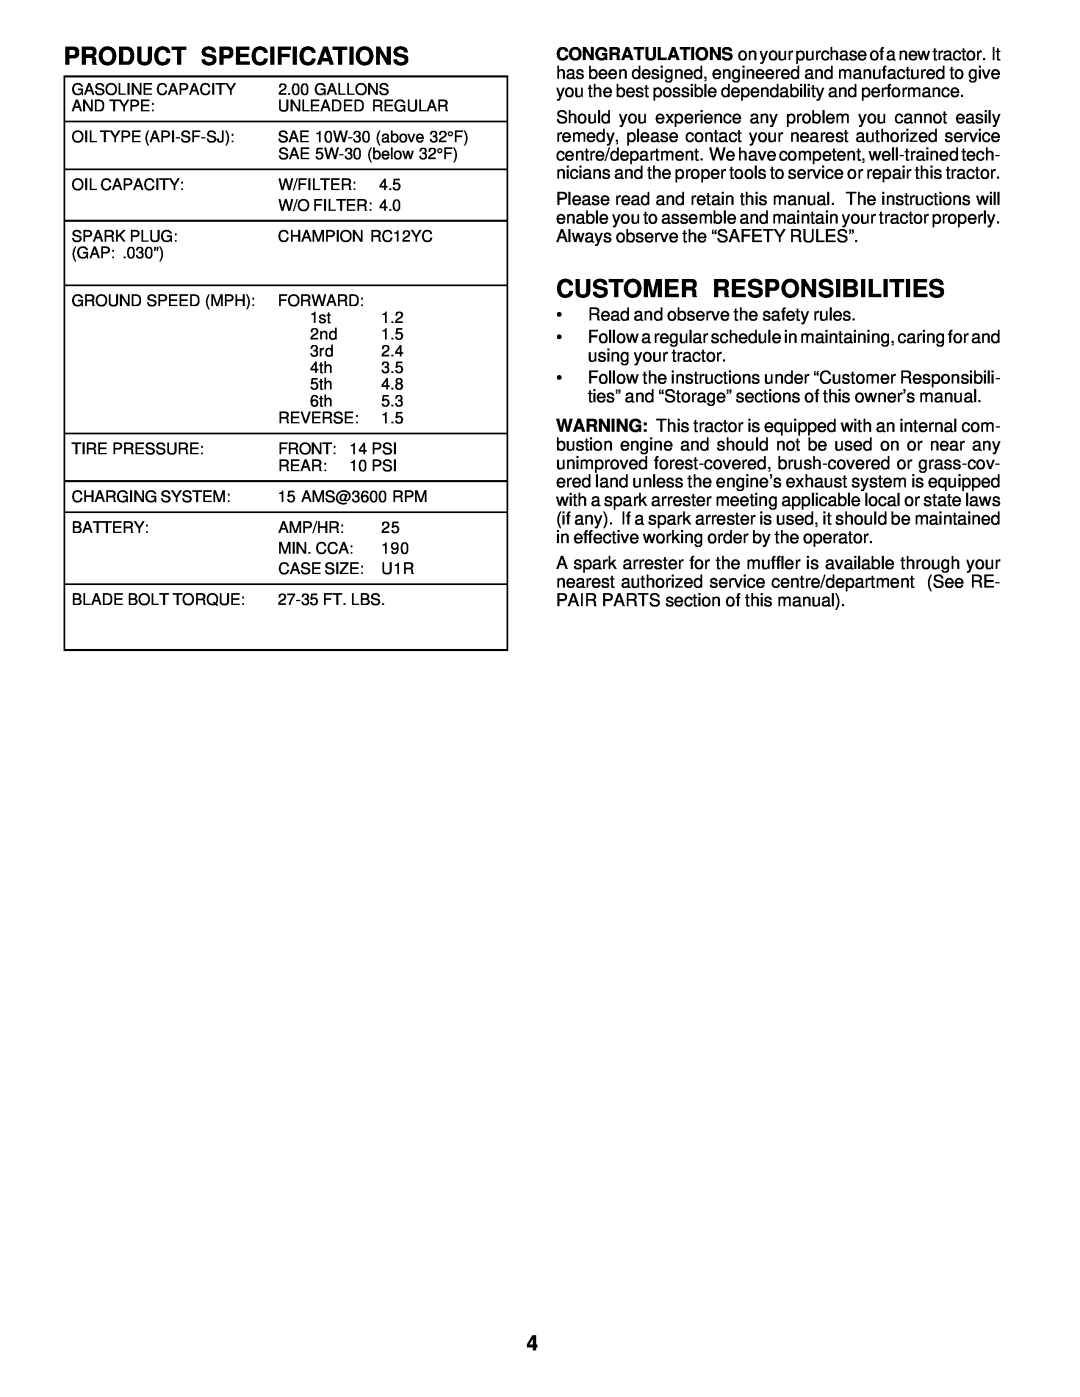 Poulan 177545 owner manual Product Specifications, Customer Responsibilities 